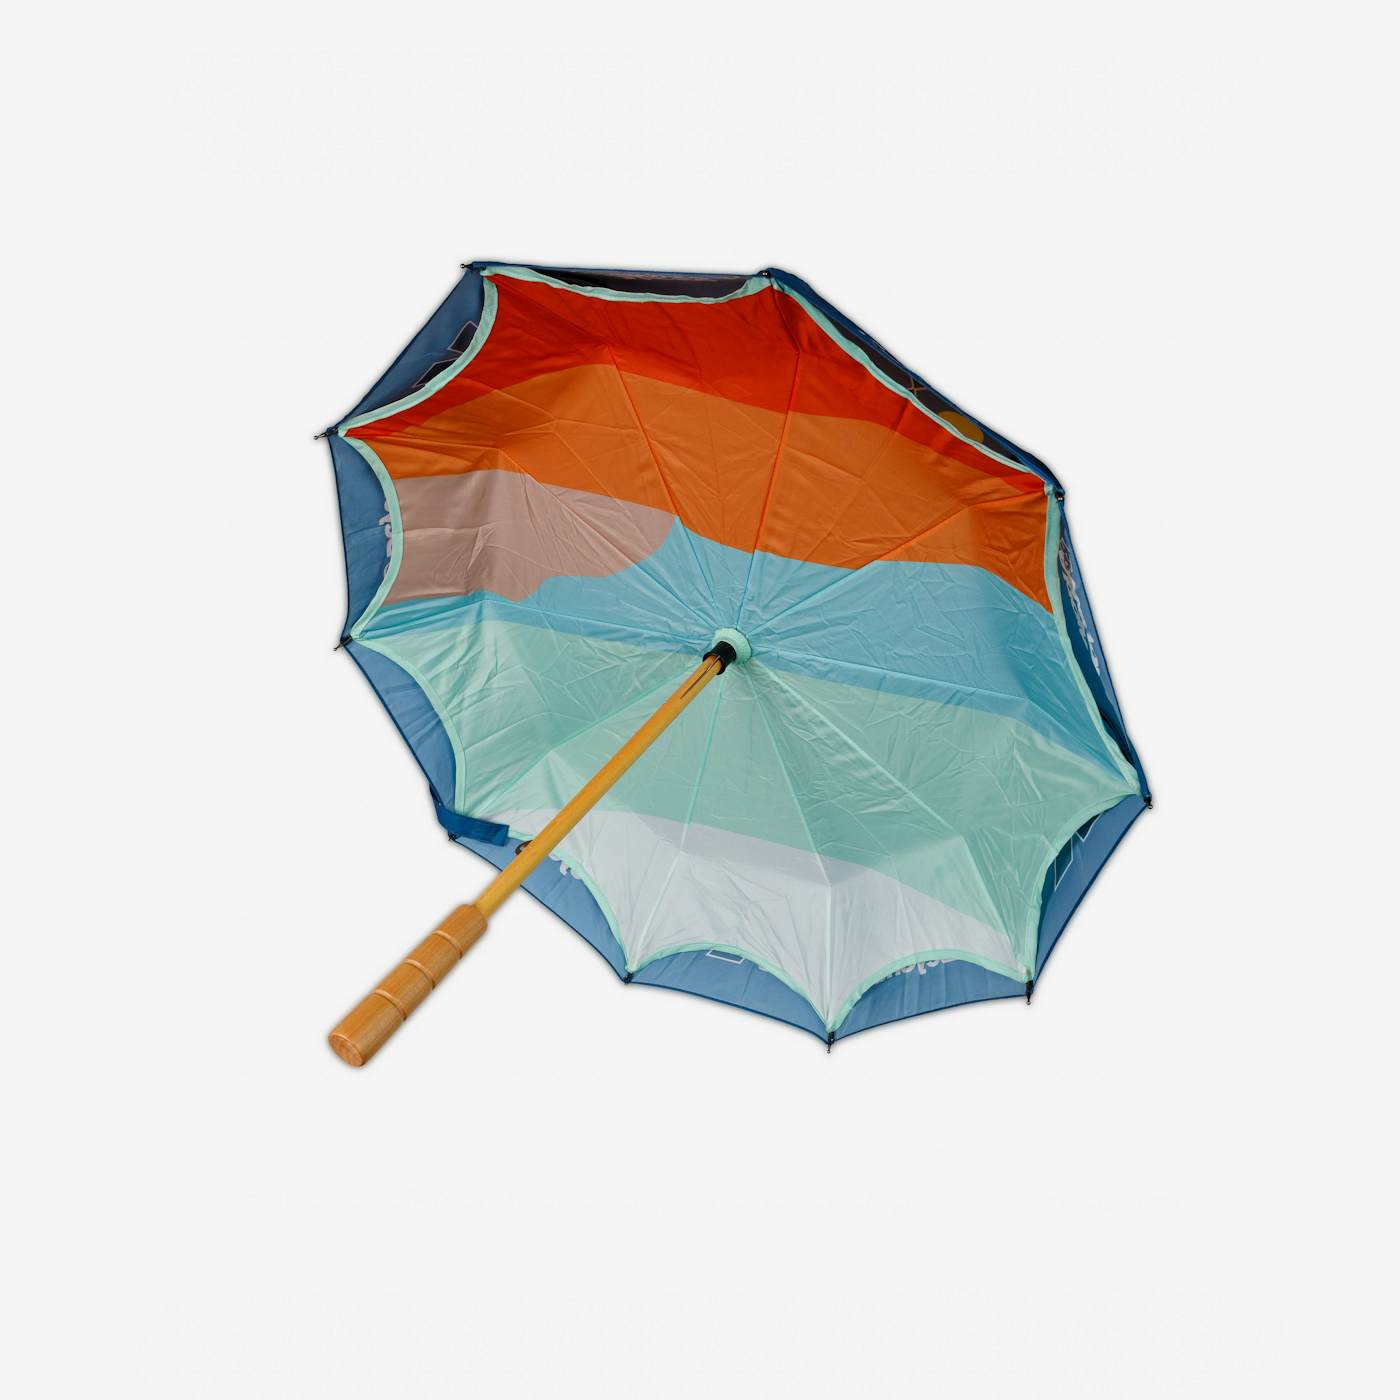 Above & Beyond Group Therapy Weekender Umbrella